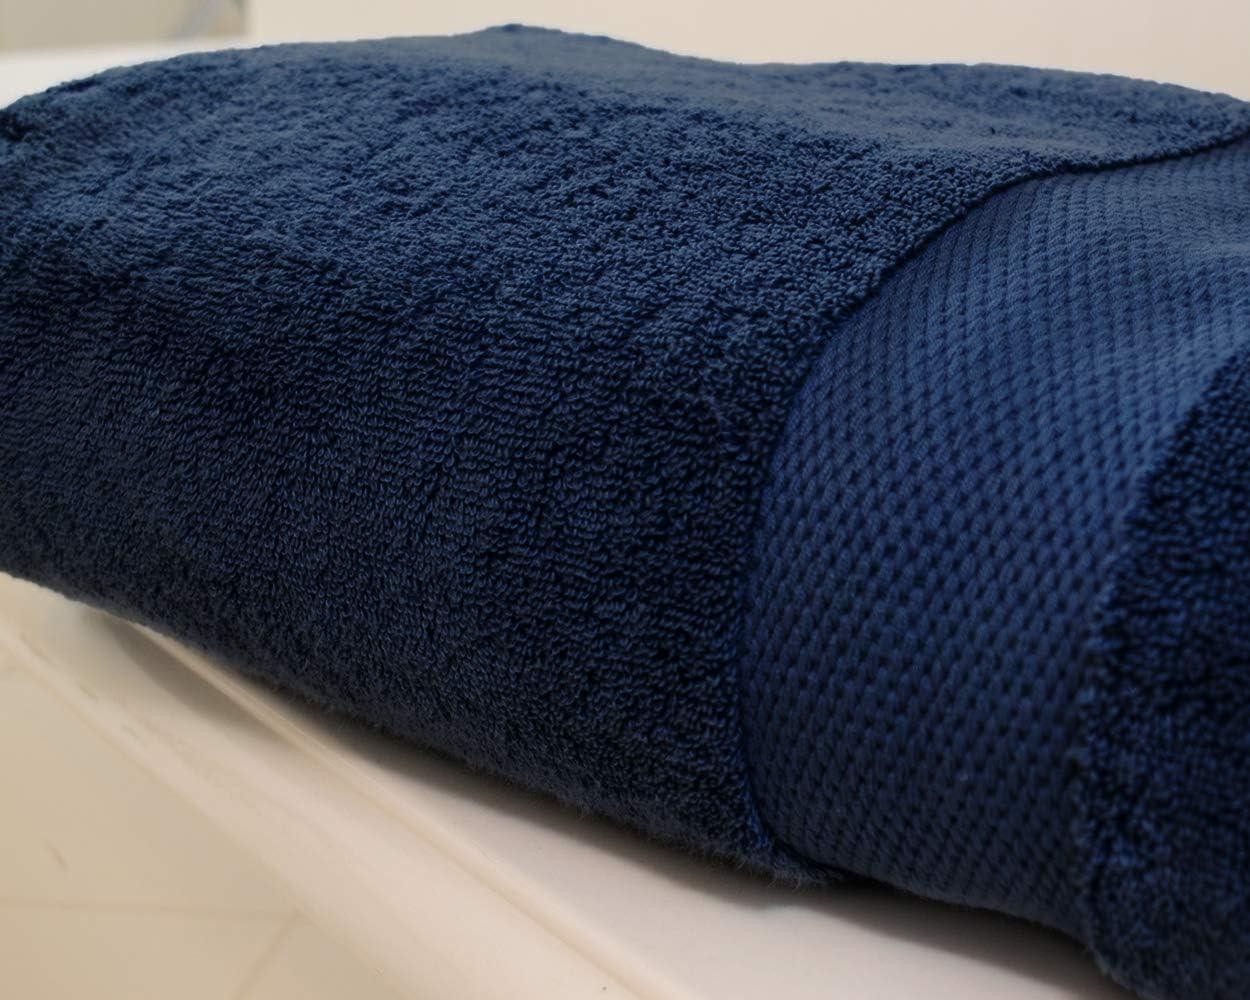 Premium Cotton Bath Sheets (Navy Blue, 30x60 Inch) Luxury Bath Towel  Perfect for Home, Bathrooms, Pool and Gym Ringspun Cotton (4, Navy Blue)